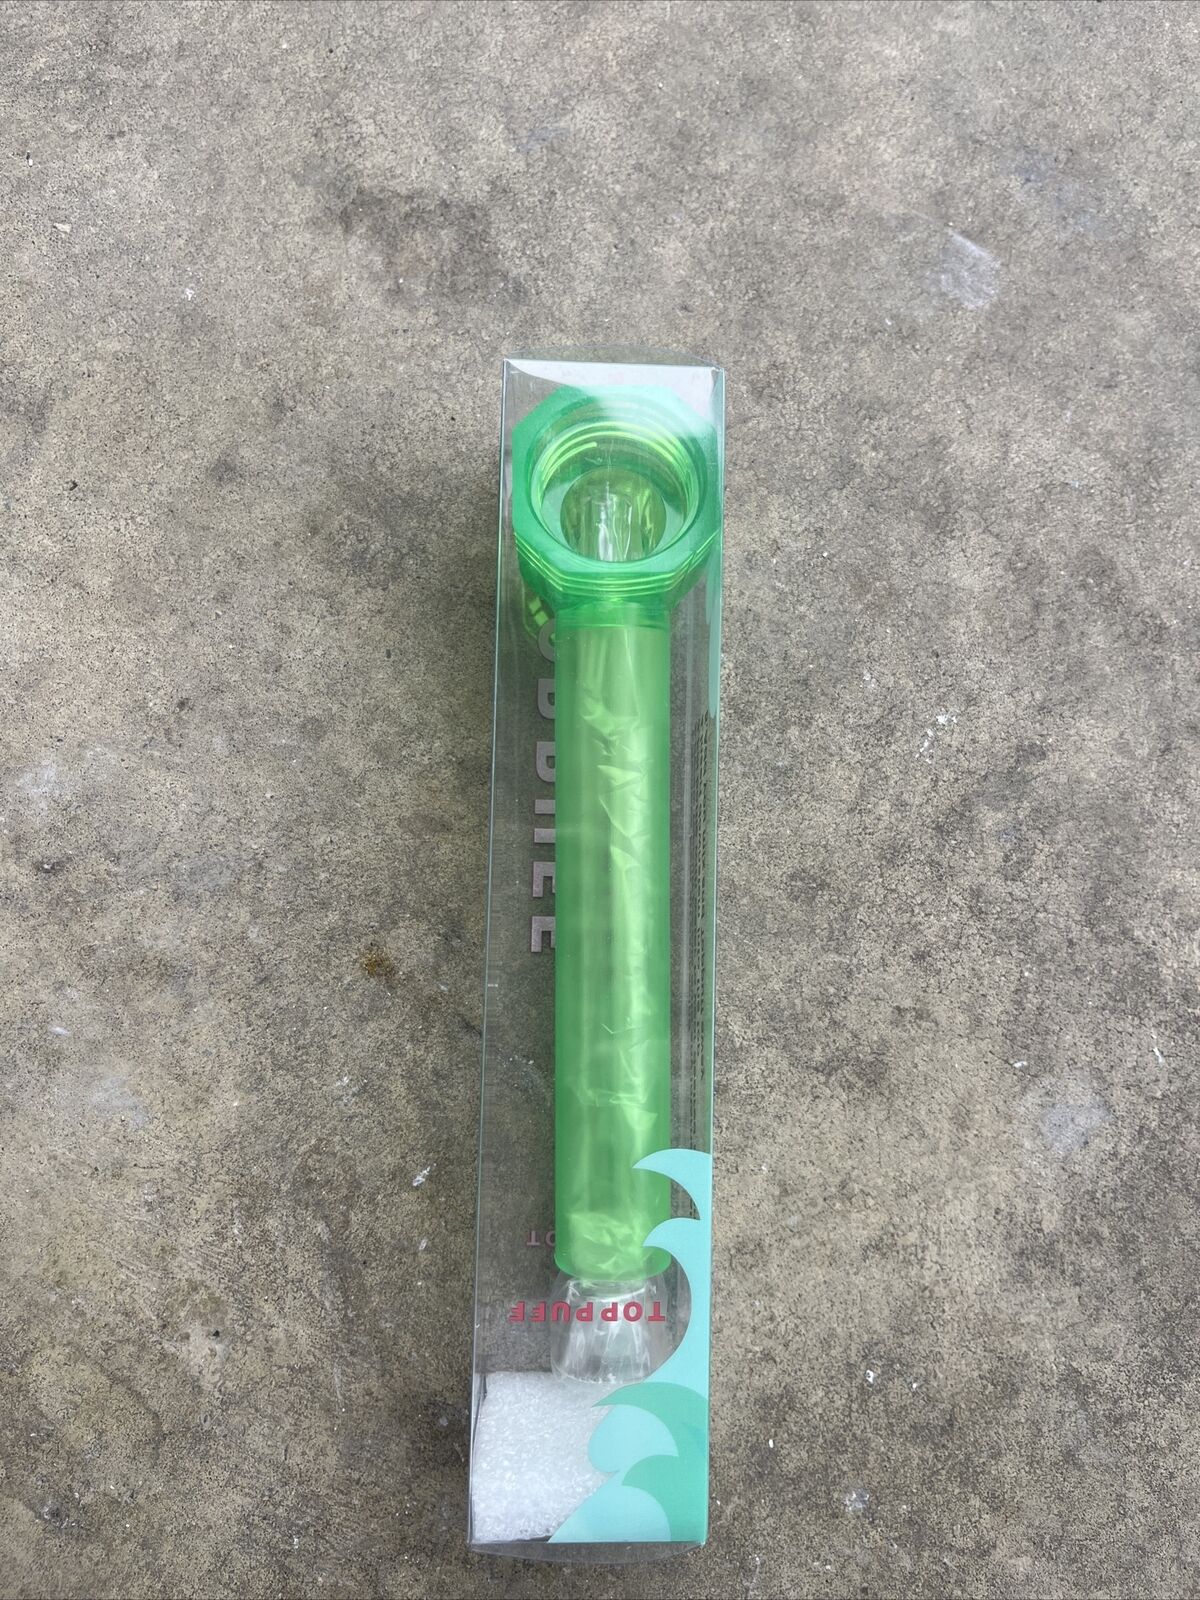 Top Puff Screw-on Water Bottle Converter Glass Bong Hookah Pipe -green. Available Now for 6.00